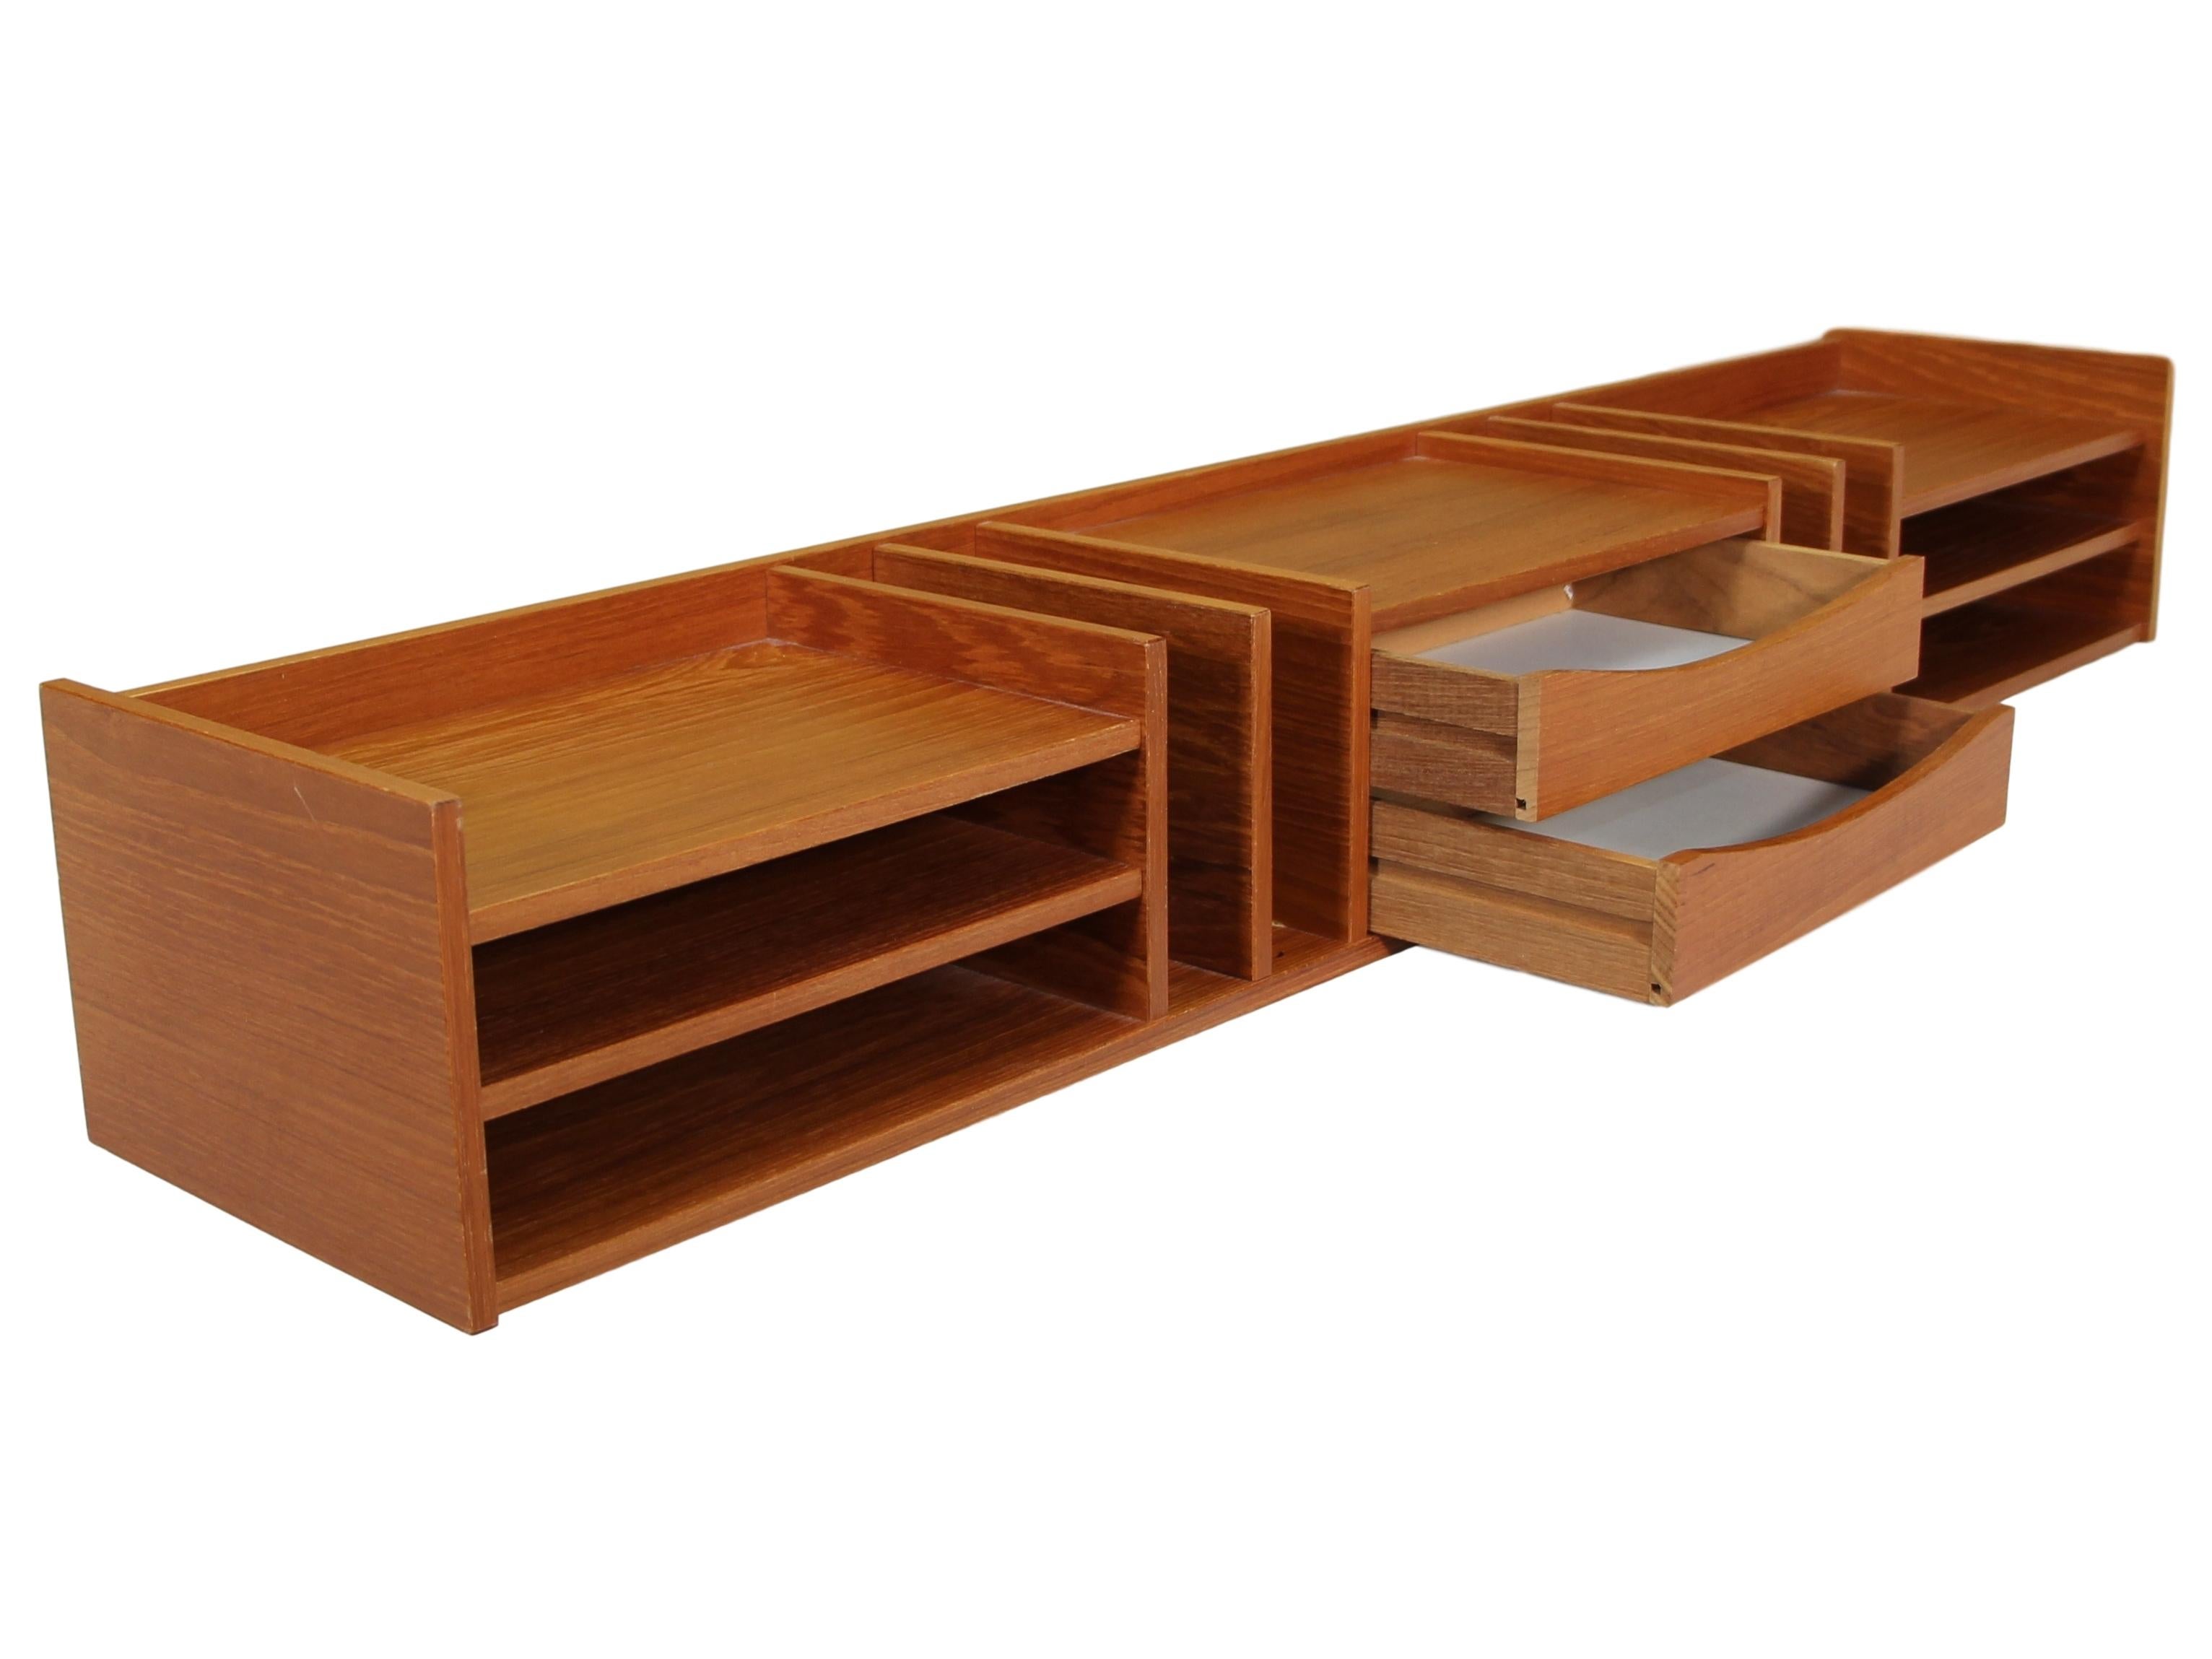 Stunning Mid-Century Modern Pedersen & Hansen Danish teak desktop organizer with 2 center drawers.

Very good vintage condition. There is a chip on the veneer on the right back corner. There are signs of wear consistent with age and use. Please